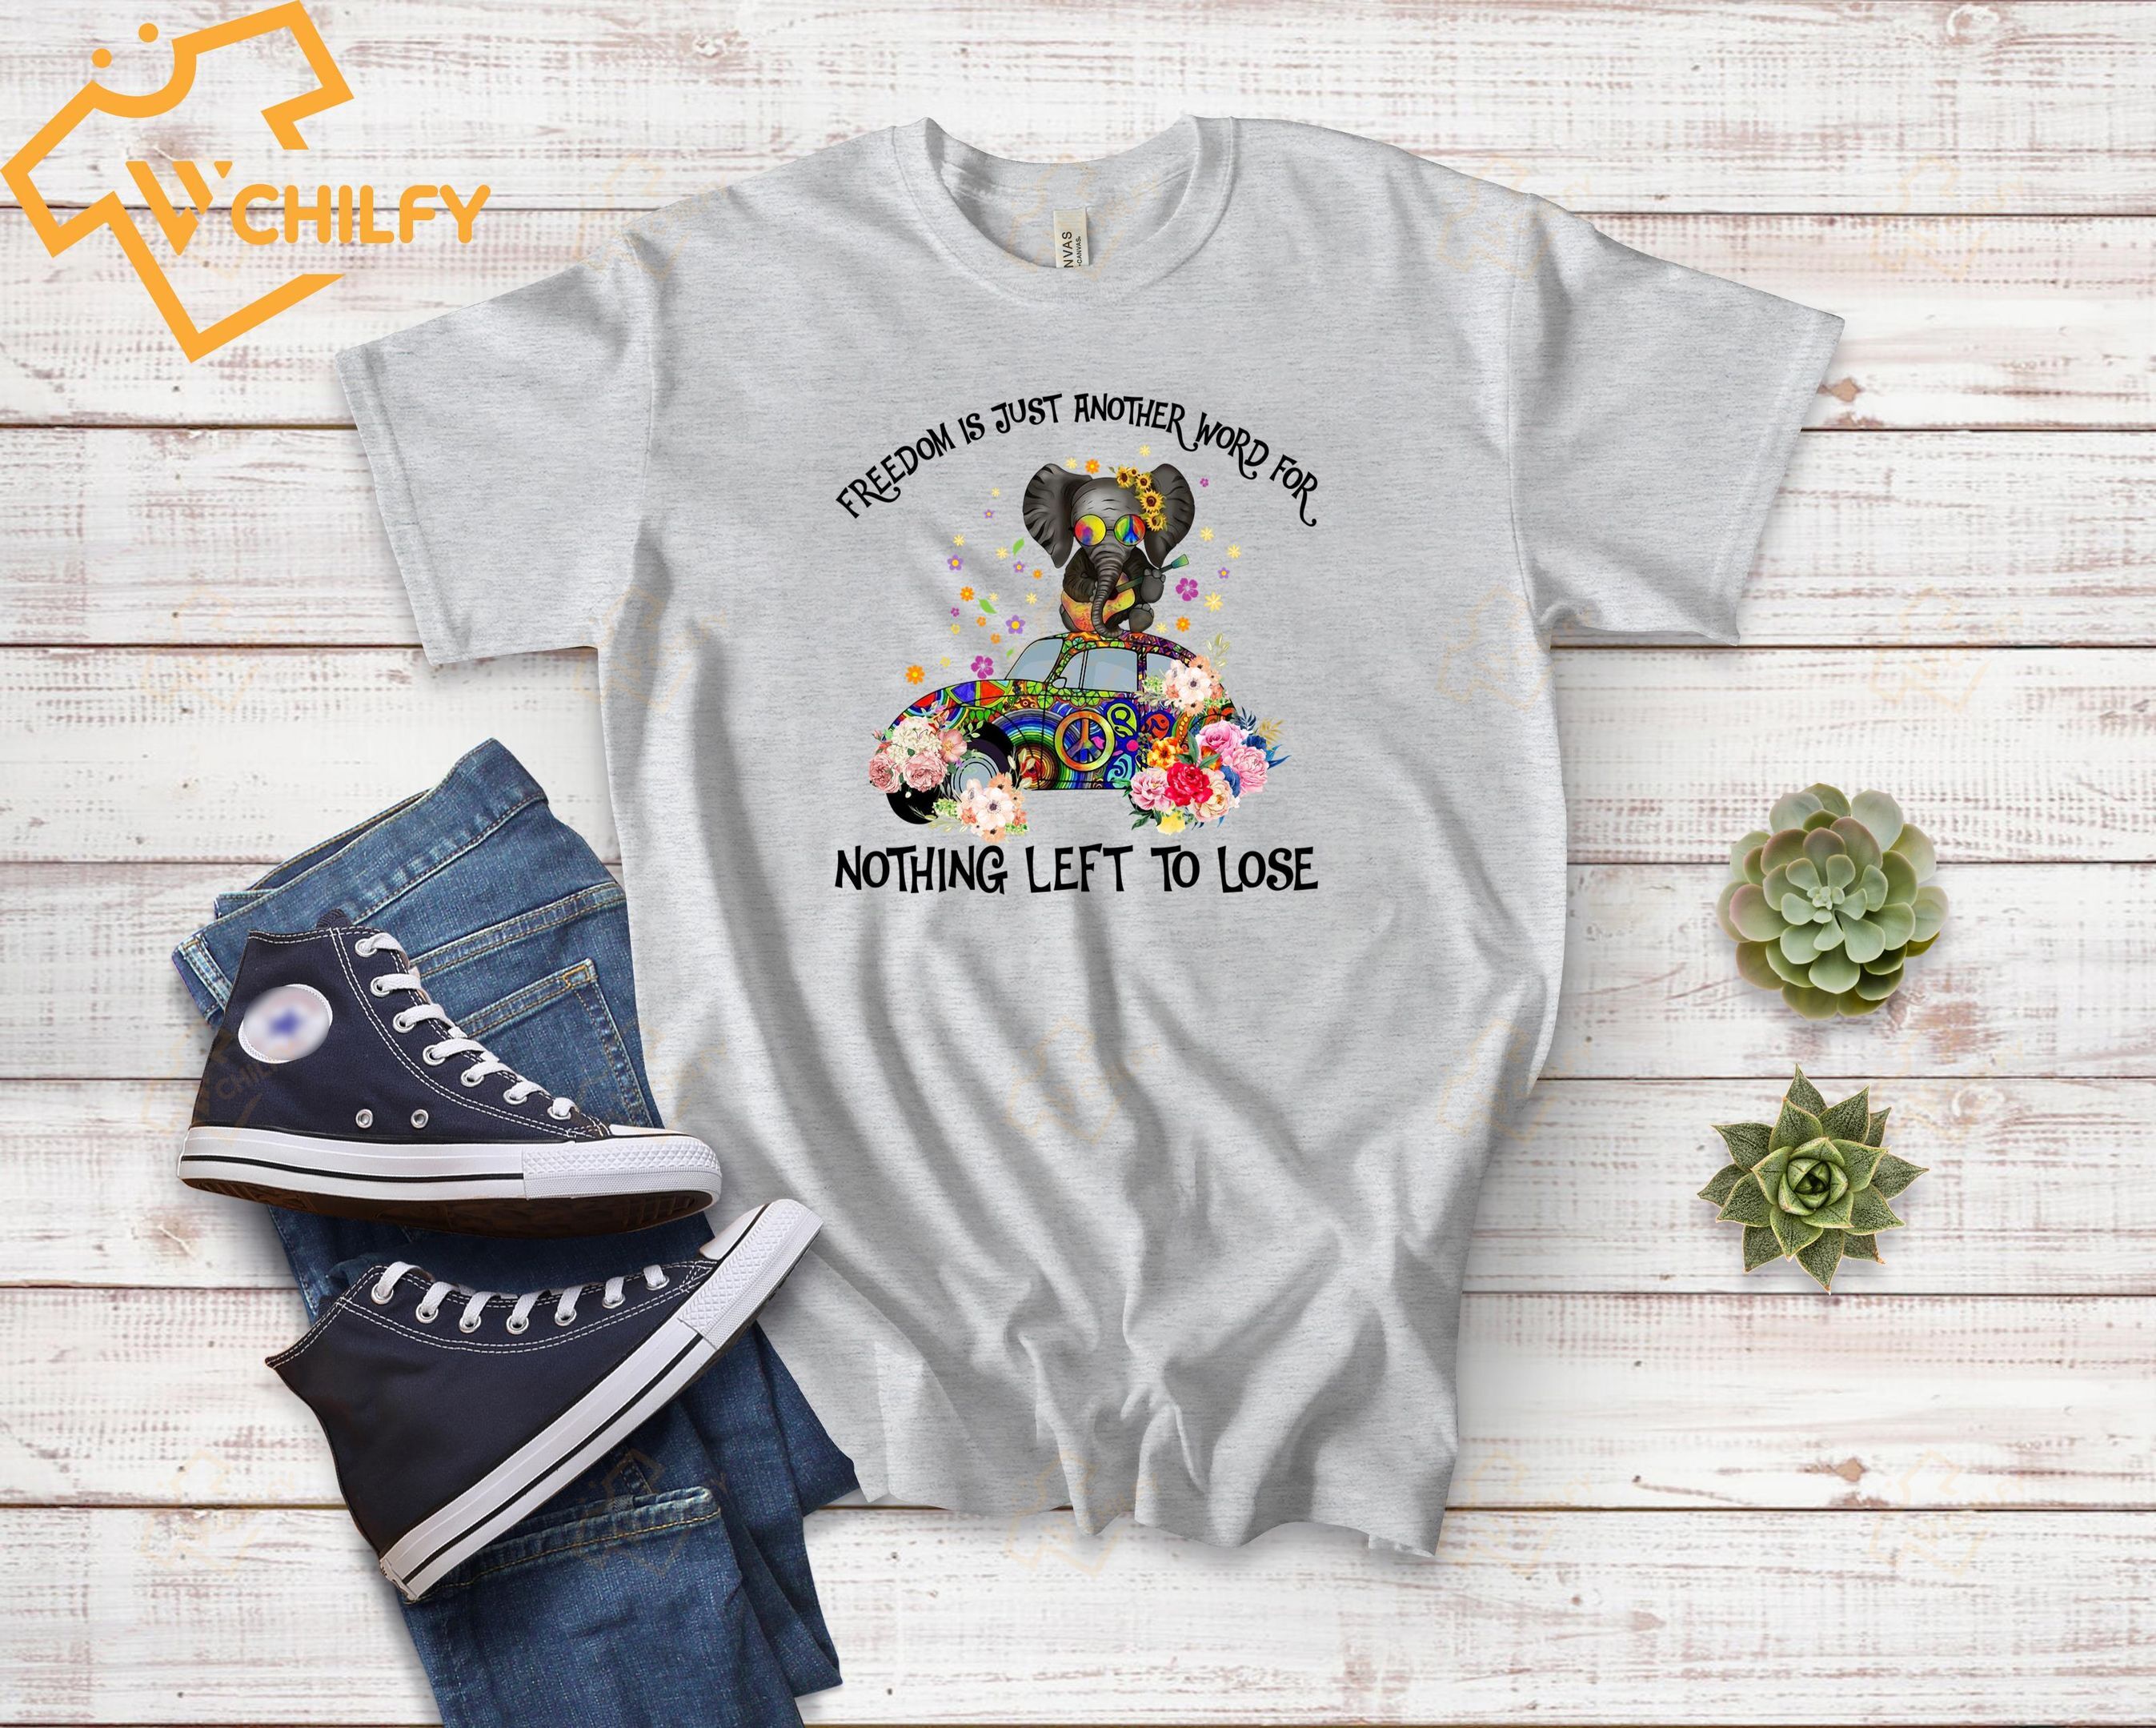 Freedom is just another word for nothing left to lose shirt, hippie shirt